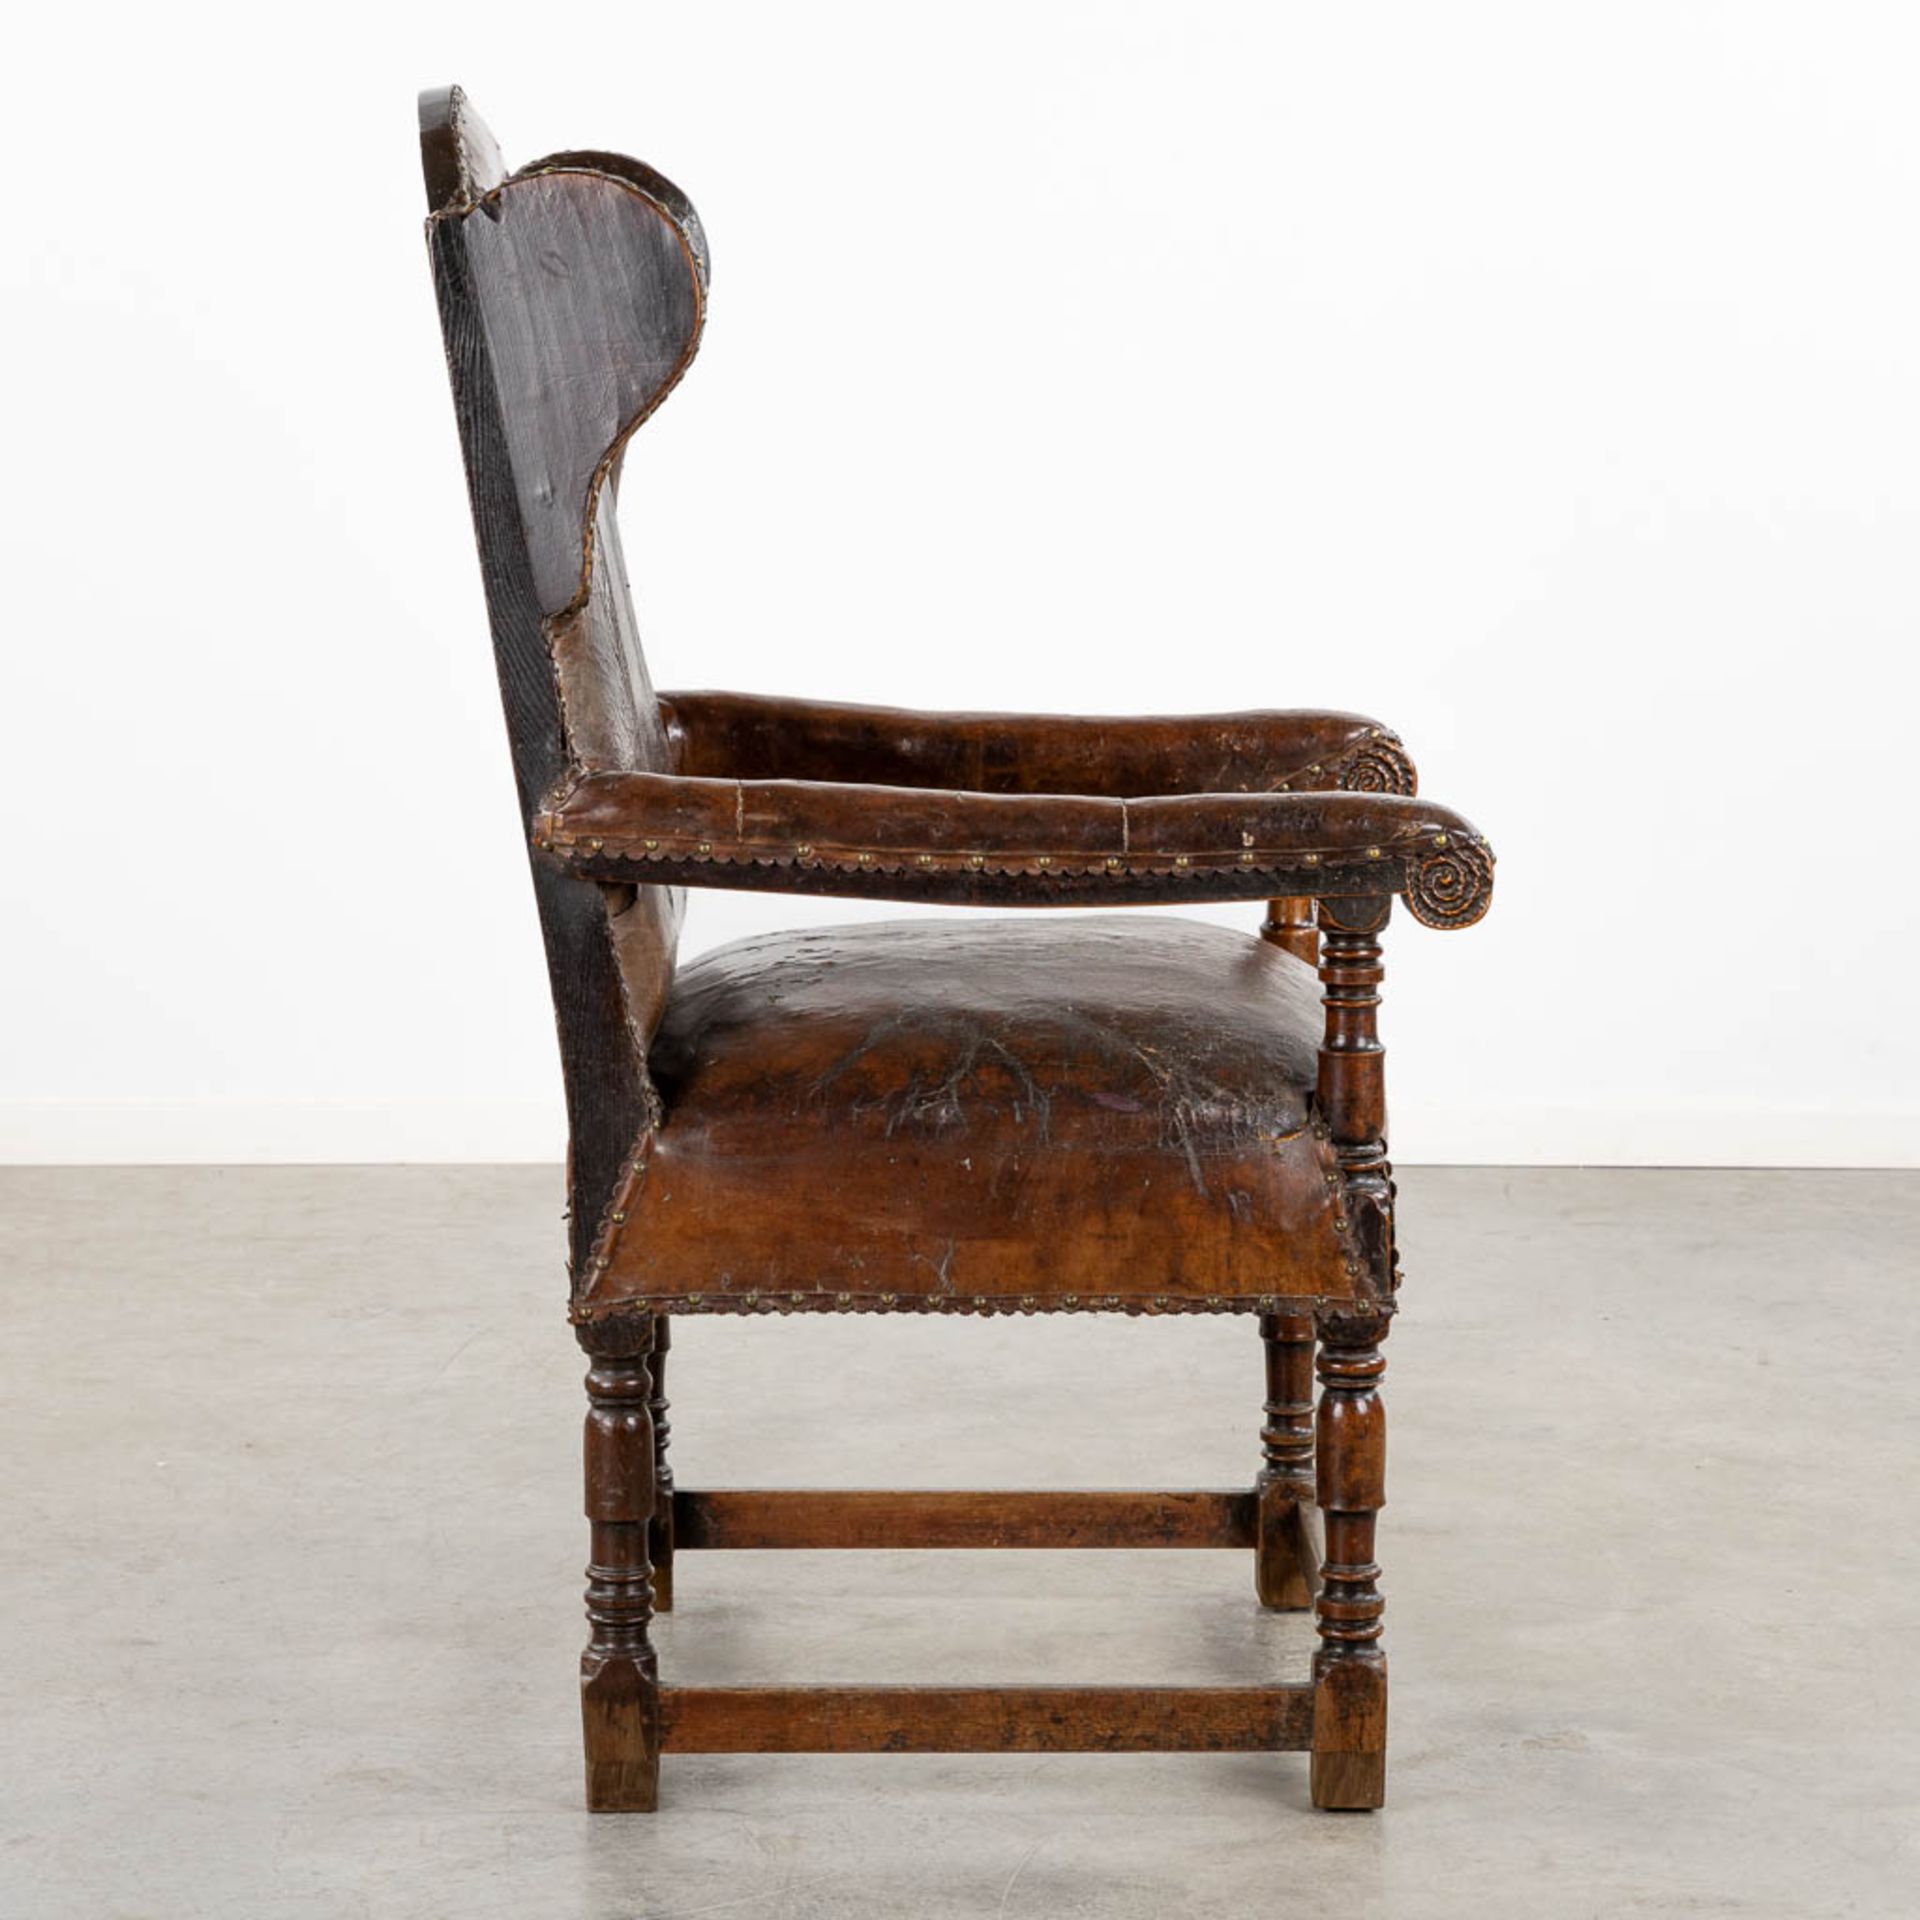 An antique Throne chair, leather on wood, great patina. 18th C. (L:76 x W:67 x H:125 cm) - Bild 6 aus 13